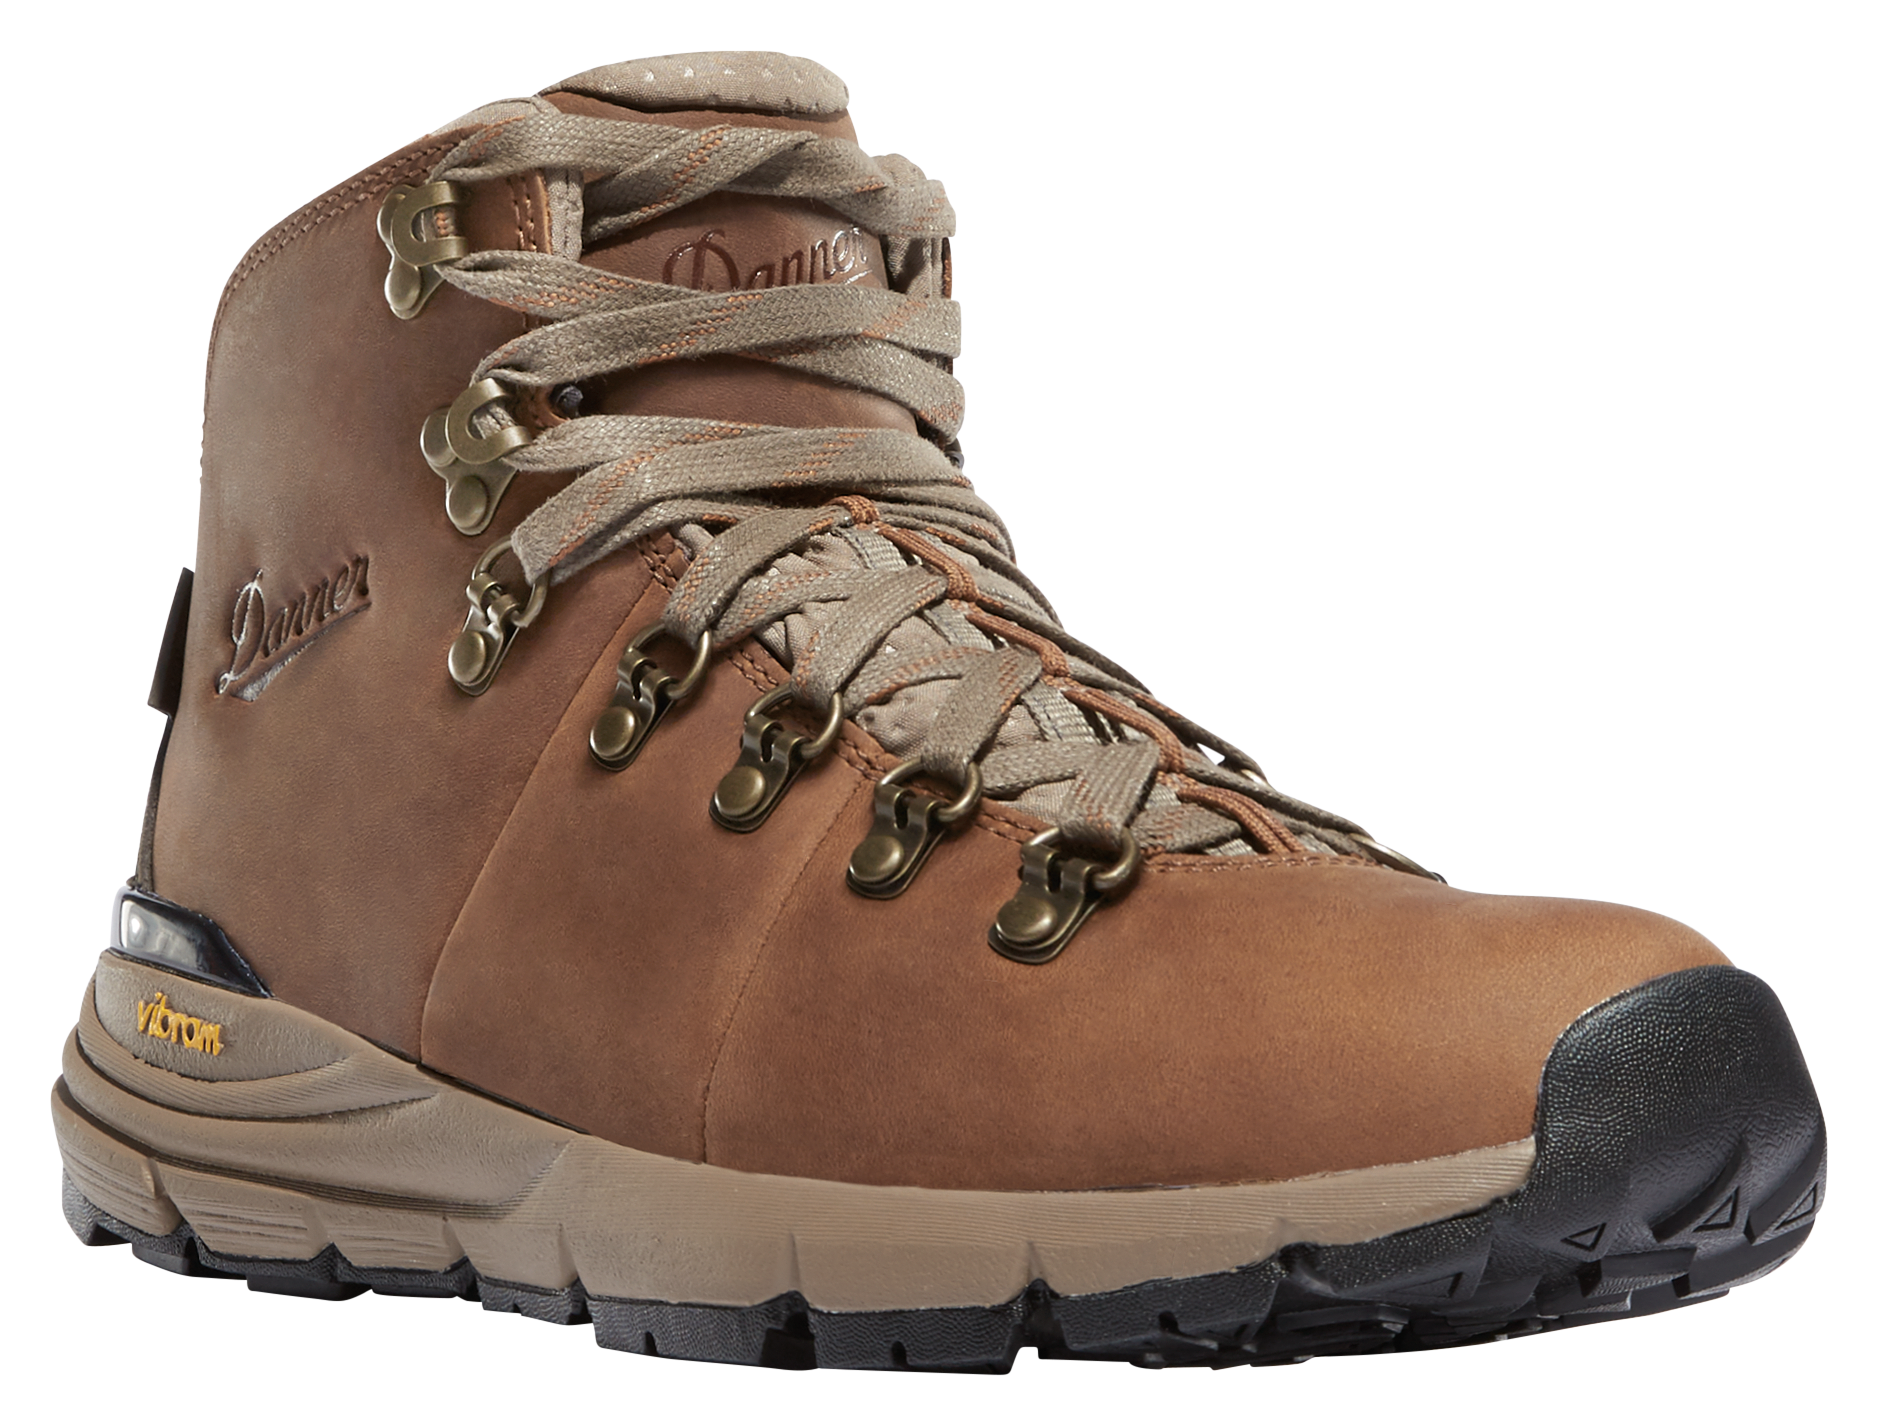 Danner Mountain 600 Leather Waterproof Hiking Boots for Ladies - Rich Brown - 8M